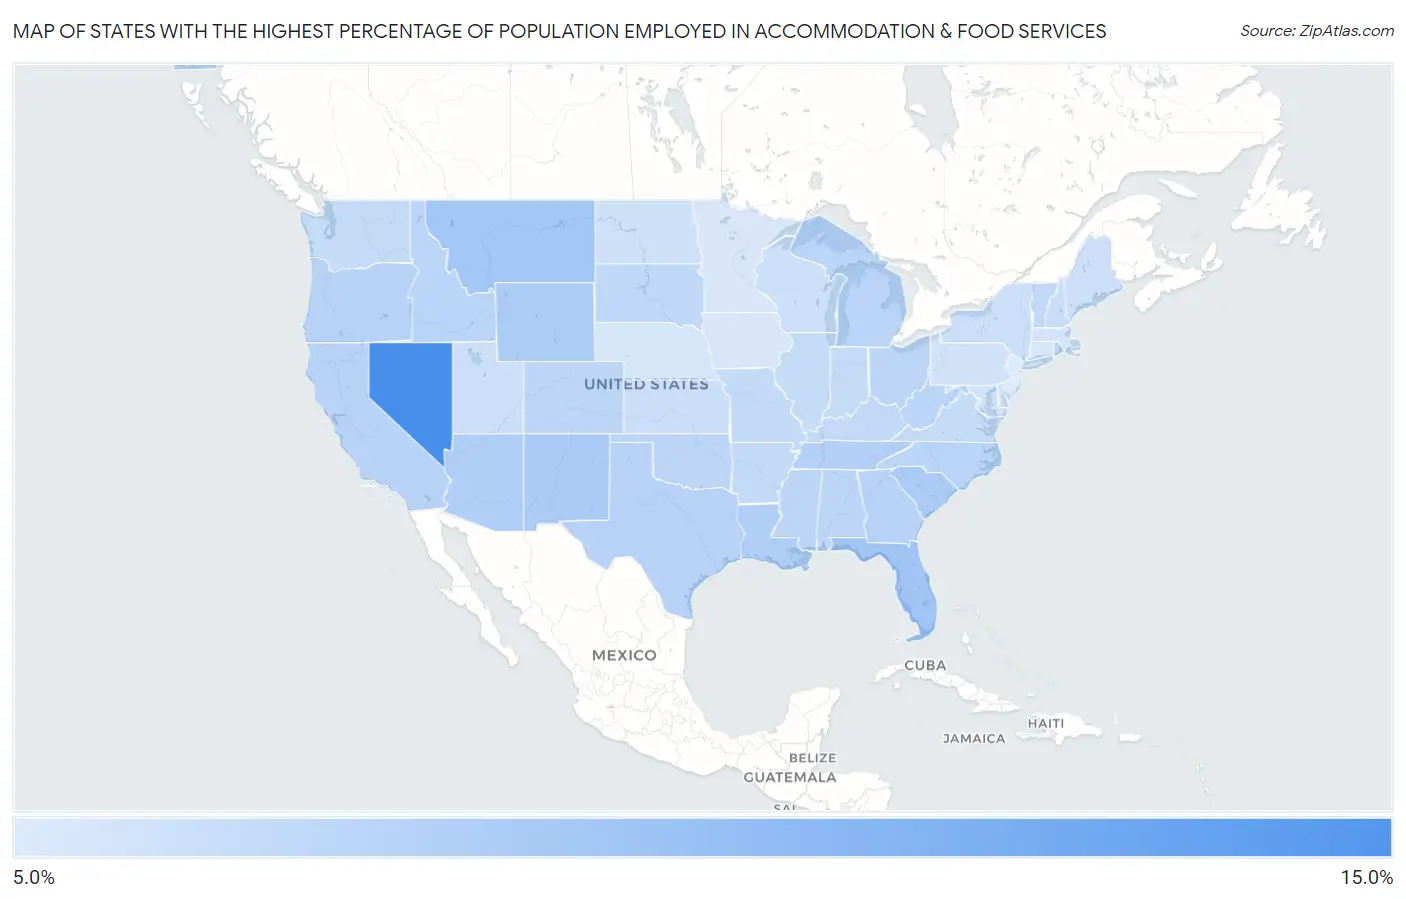 States with the Highest Percentage of Population Employed in Accommodation & Food Services in the United States Map